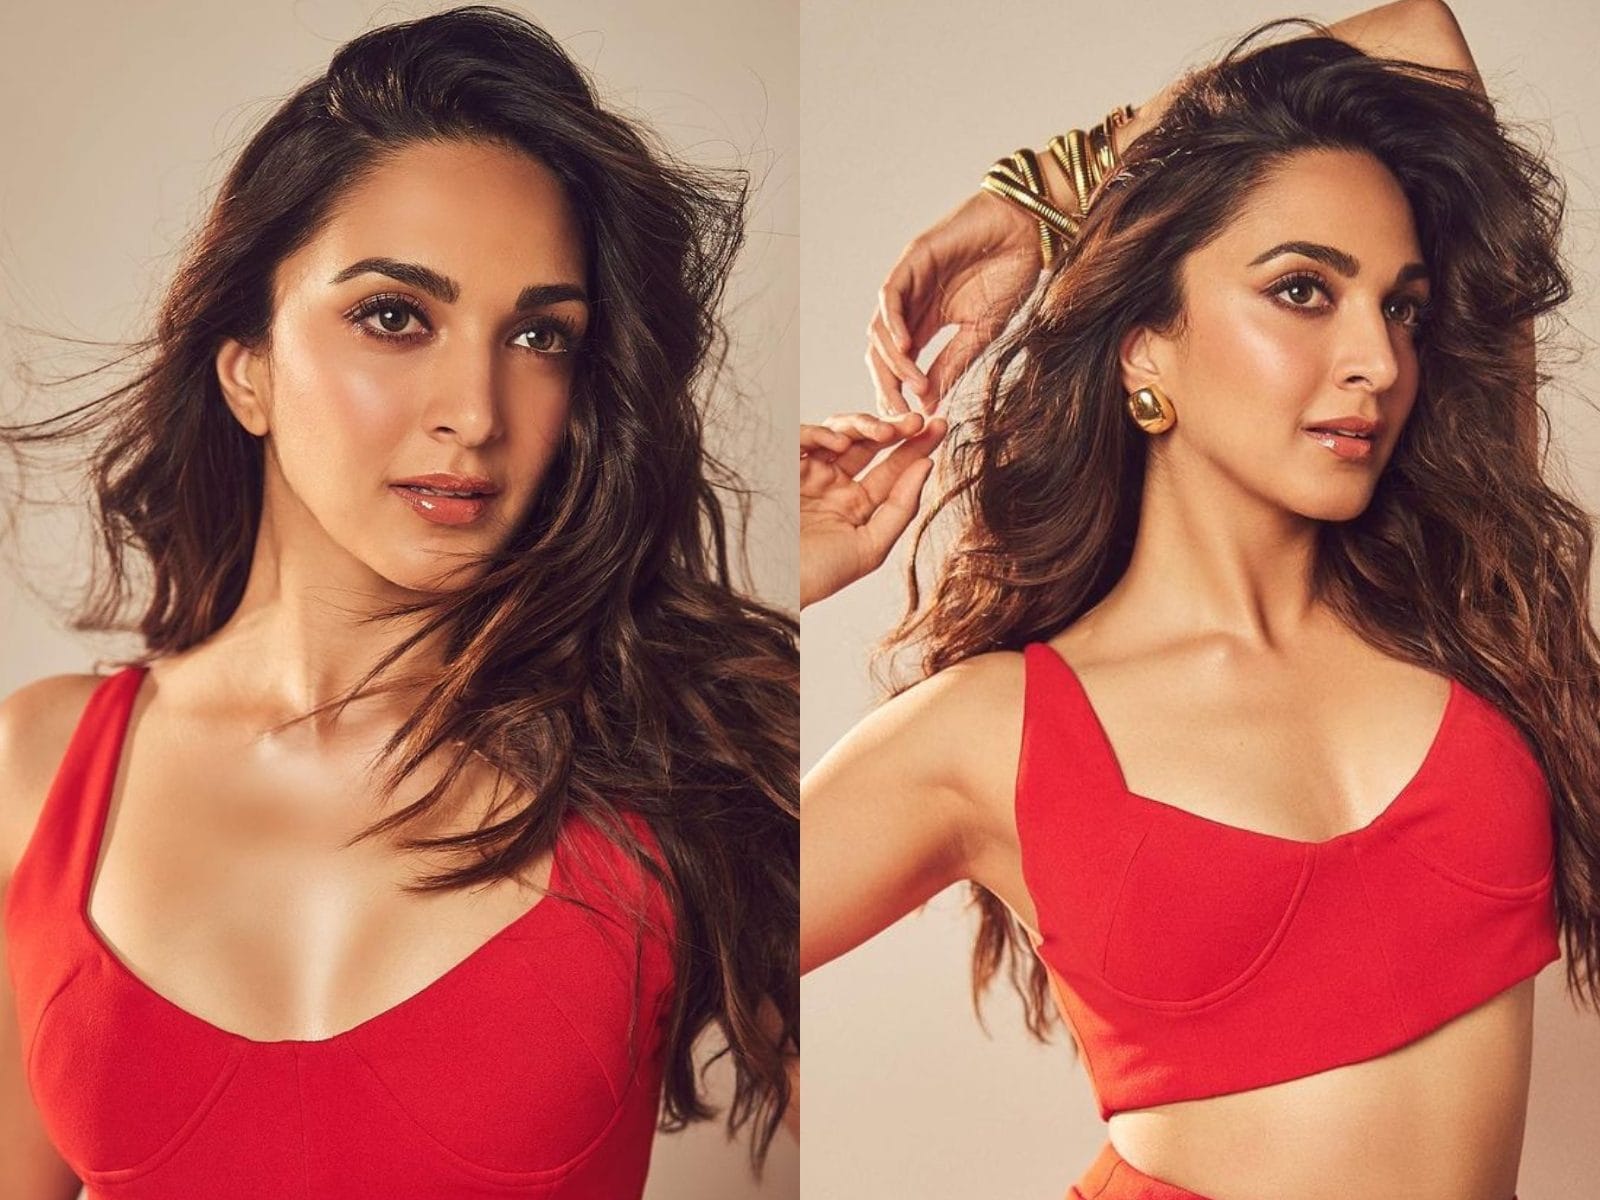 Kiara Advani Makes Fans Go 'OMG' As She Flaunts Her Curves In Red